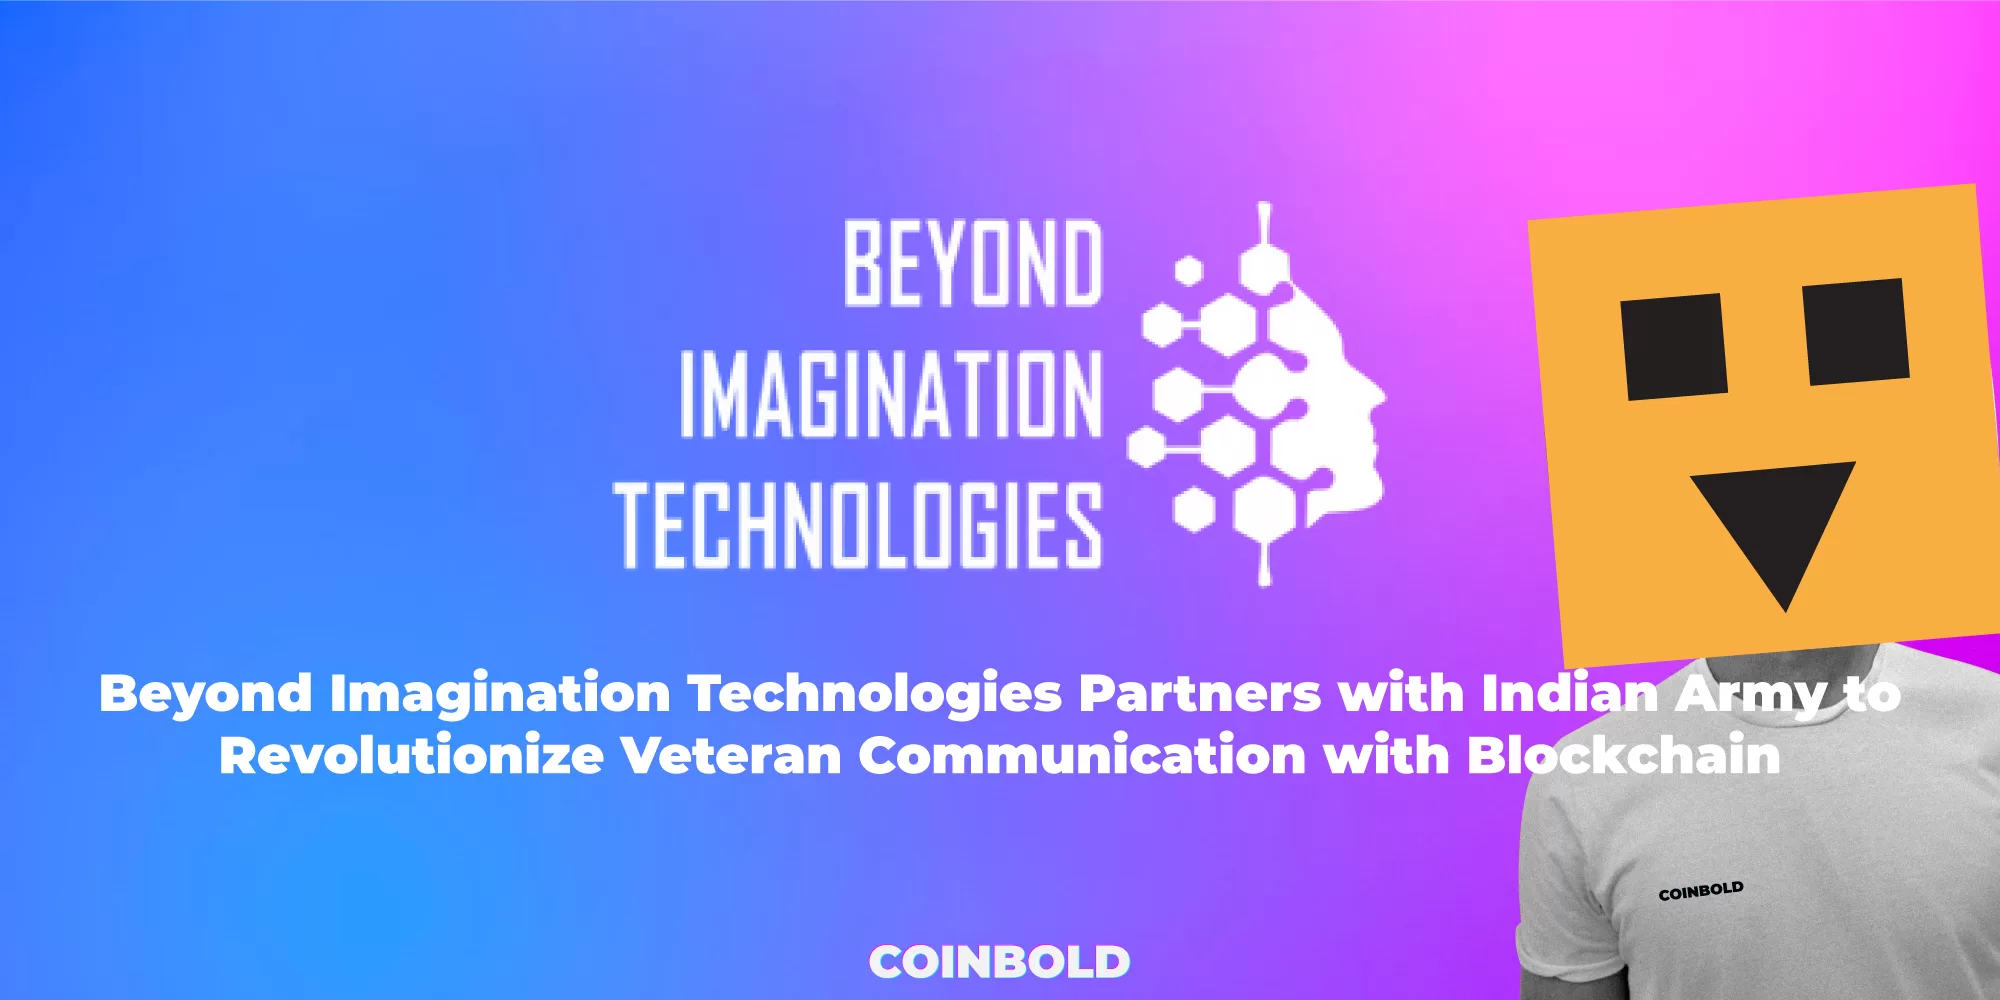 Beyond Imagination Technologies Partners with Indian Army to Revolutionize Veteran Communication with Blockchain